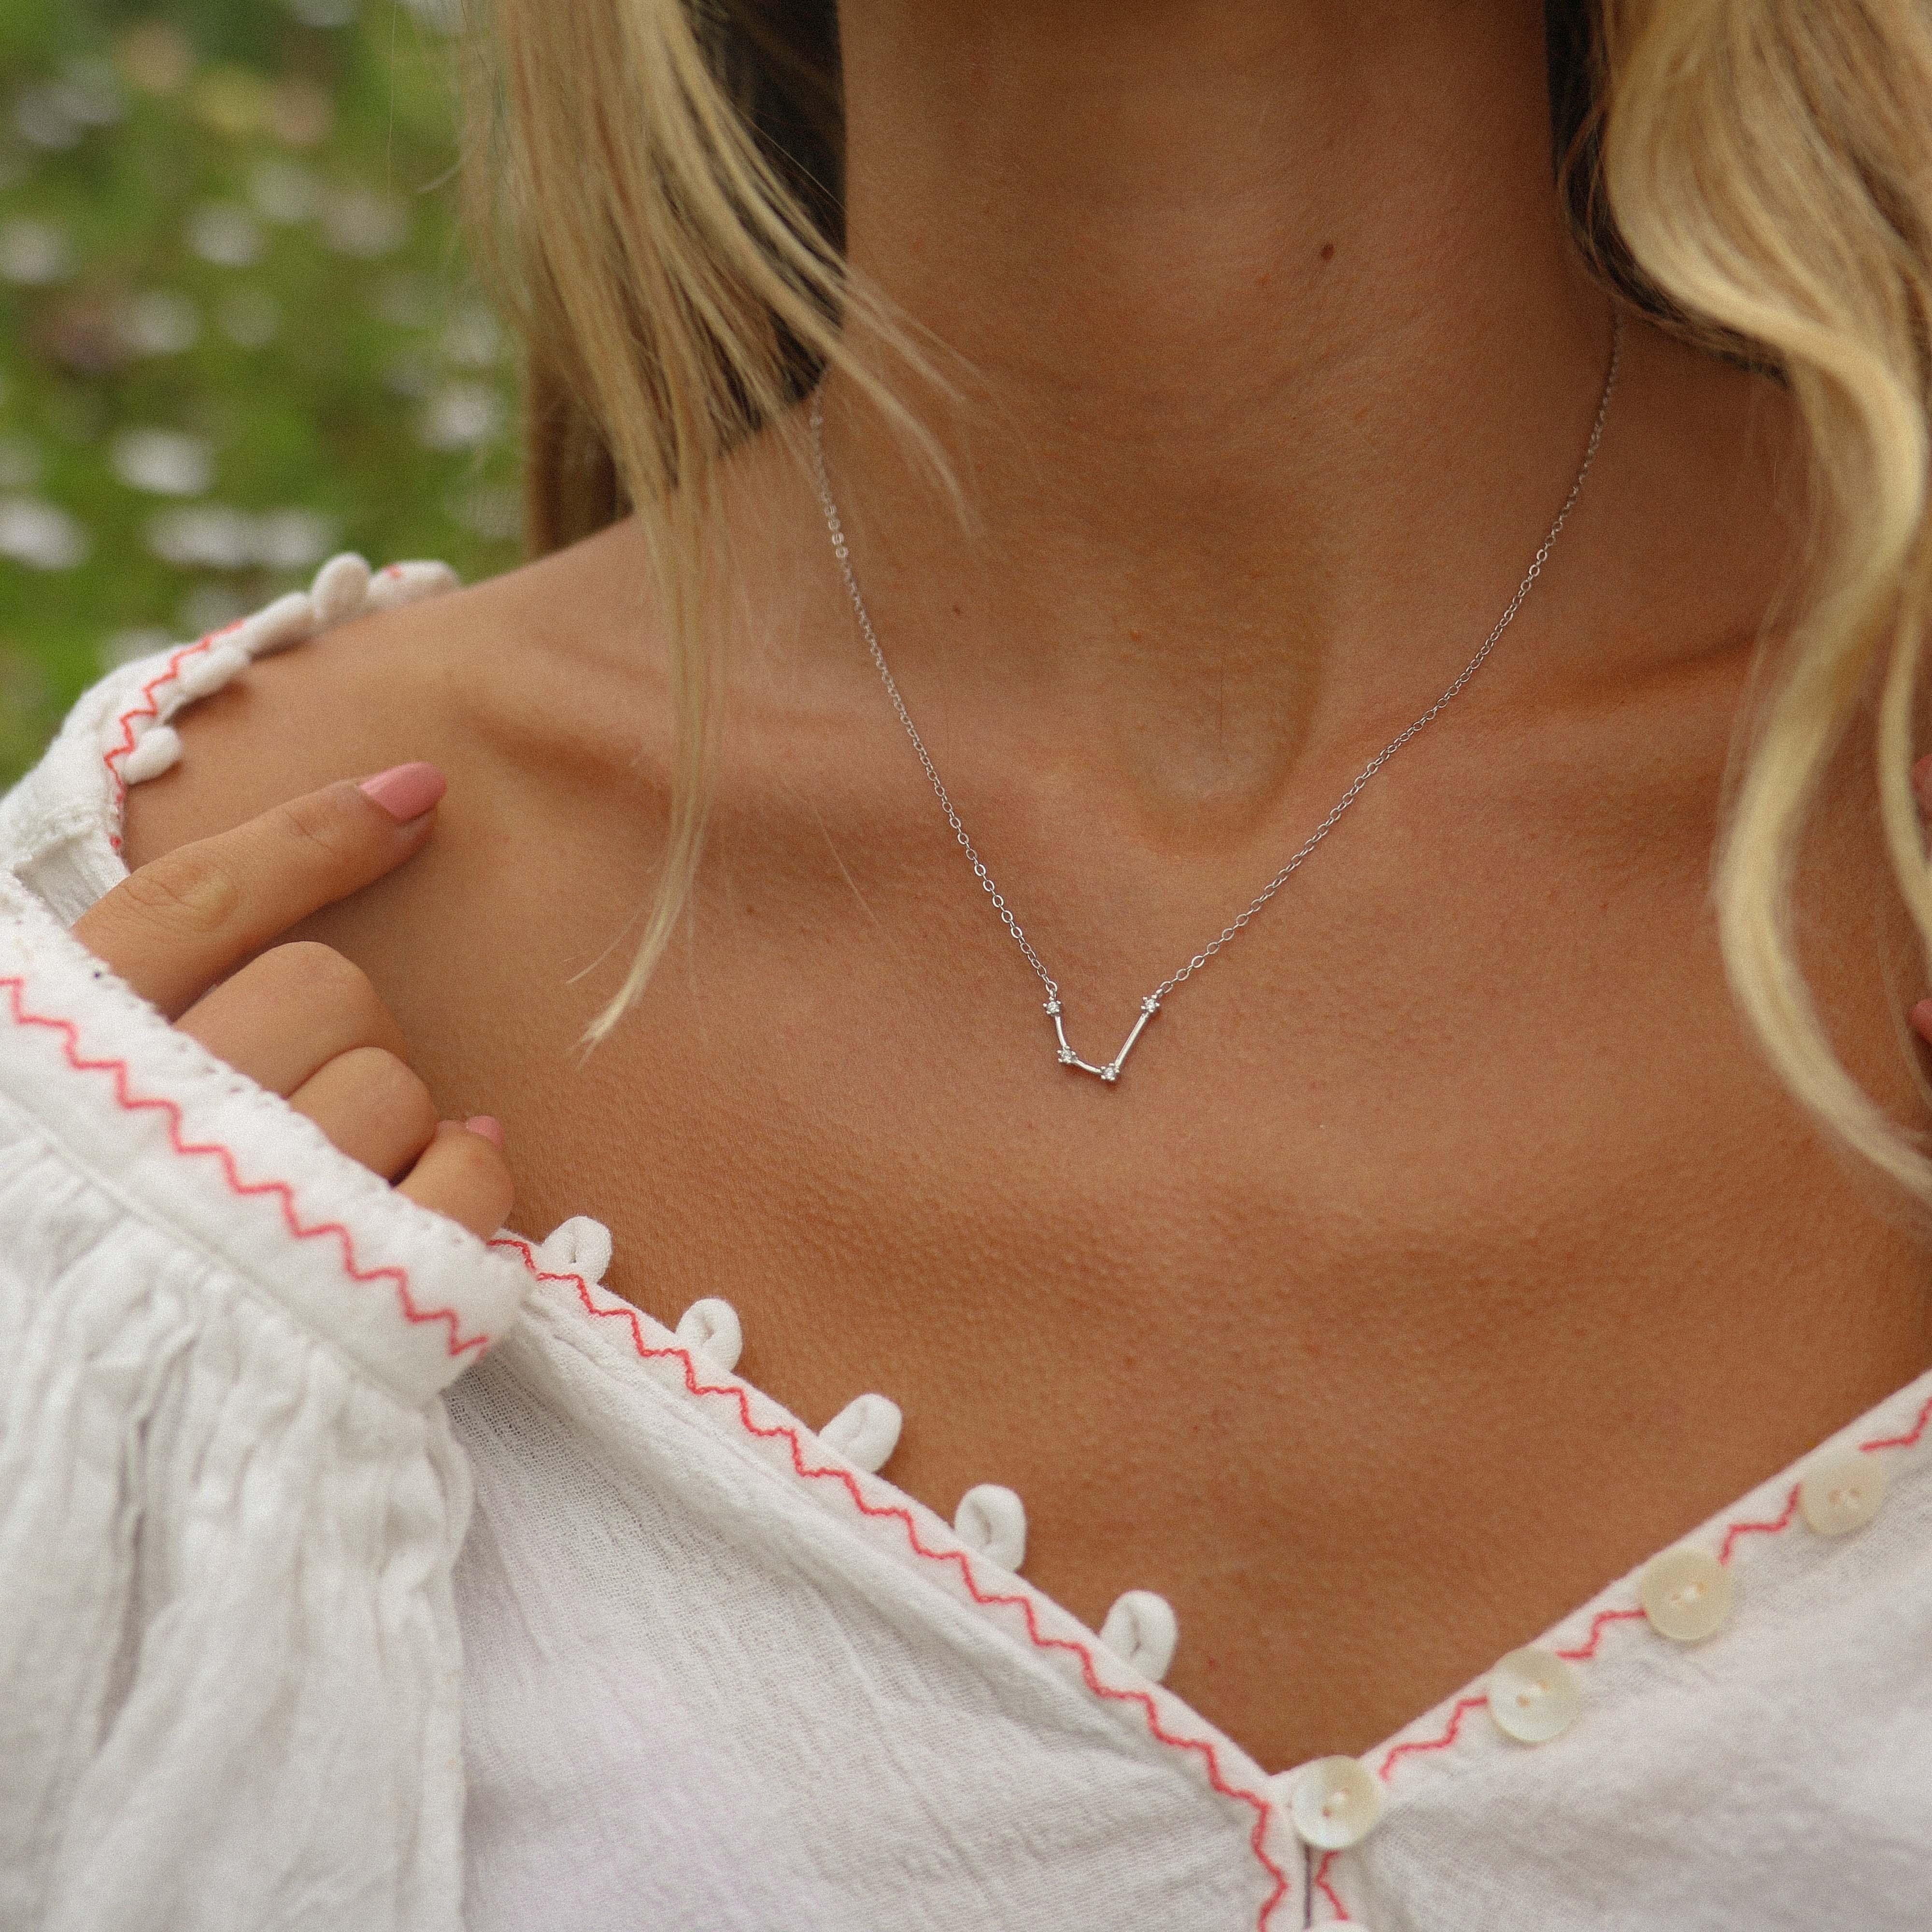 Libra Constellation Necklace - womens jewellery by indie and harper